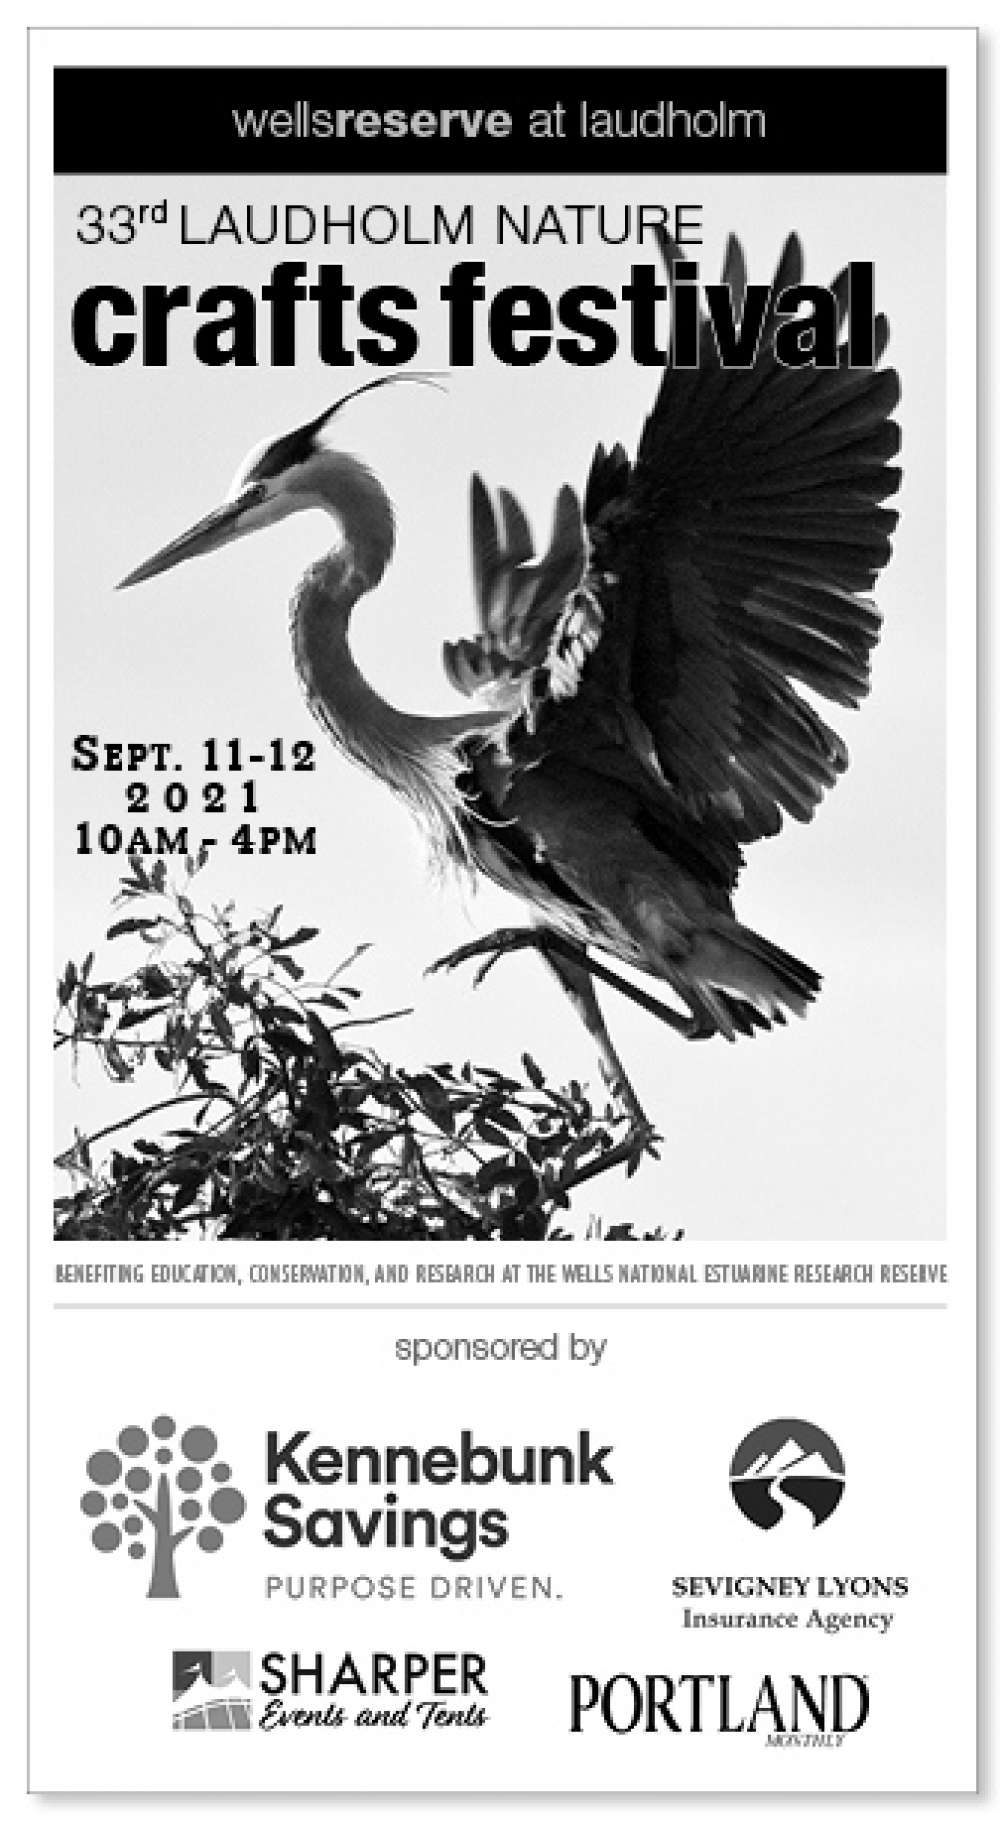 Cover of the program brochure for the 2021 Laudholm Nature Crafts Festival, featuring a great blue heron landing in a treetop.